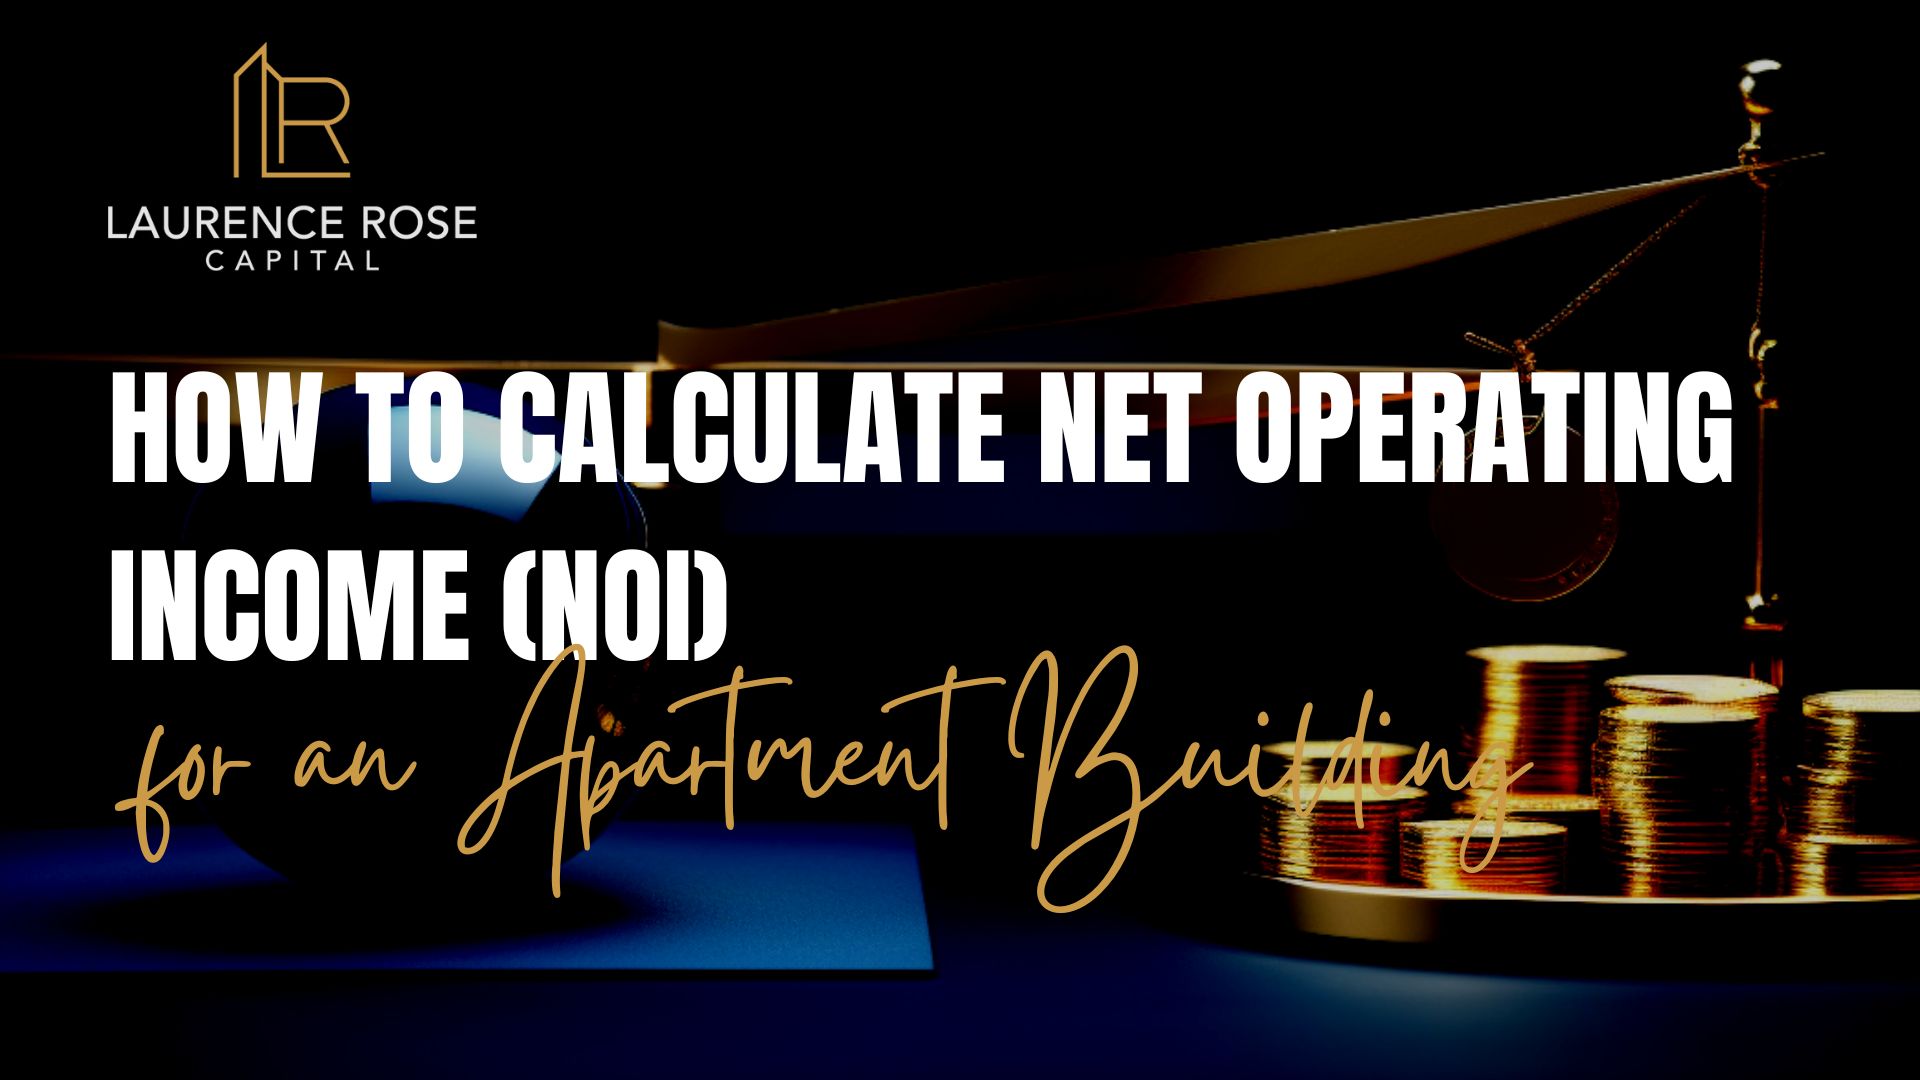 How To Calculate Net Operating Income (NOI) for an Apartment Building